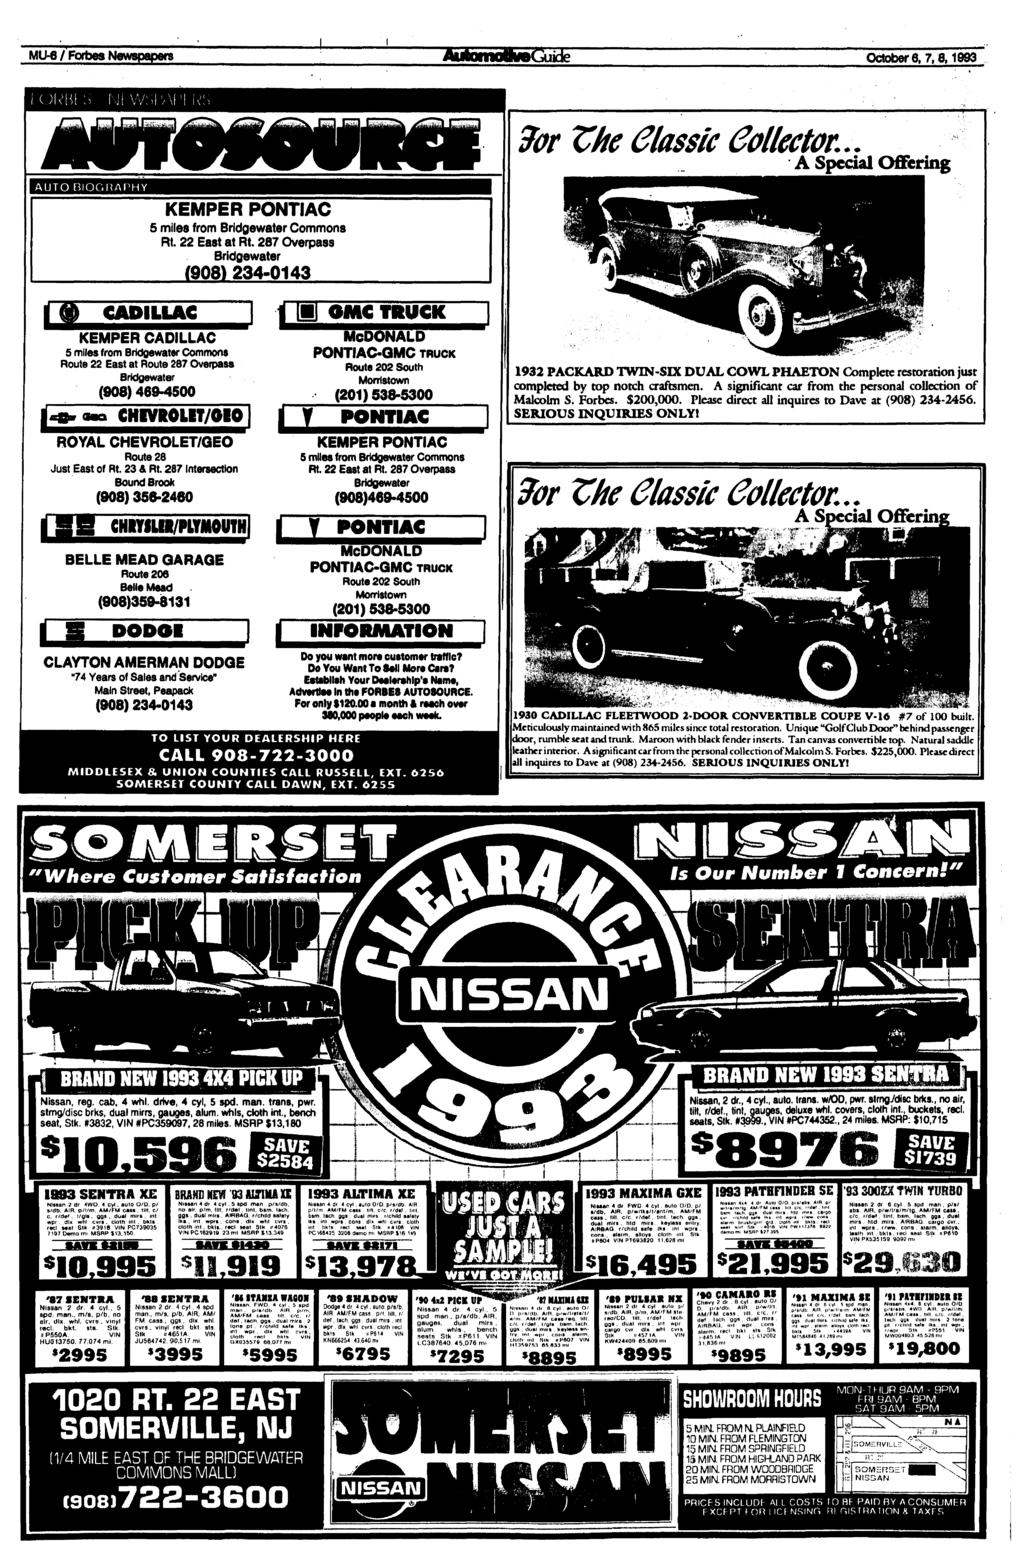 MU-6 / Forbes Newspapers Guide Octobers, 7,8,1993 AUTO BIOGRAPHY KEMPER PONTIAC 5 miles from Bridgewater Commons Rt. 22 East at Rt. 287 Overpass Bridgewater (908) 234-0143 9or Zhe Classic Collector.